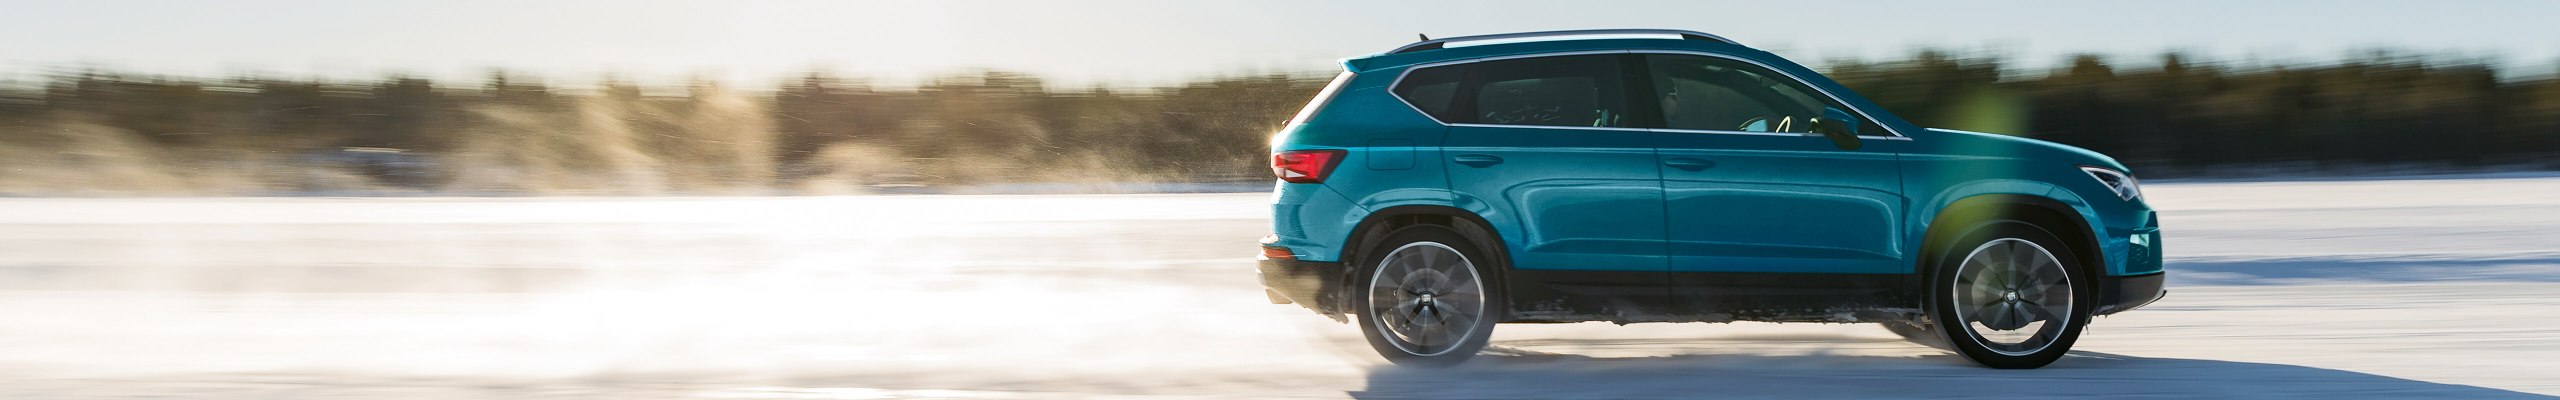 Side view of an Ateca on a road